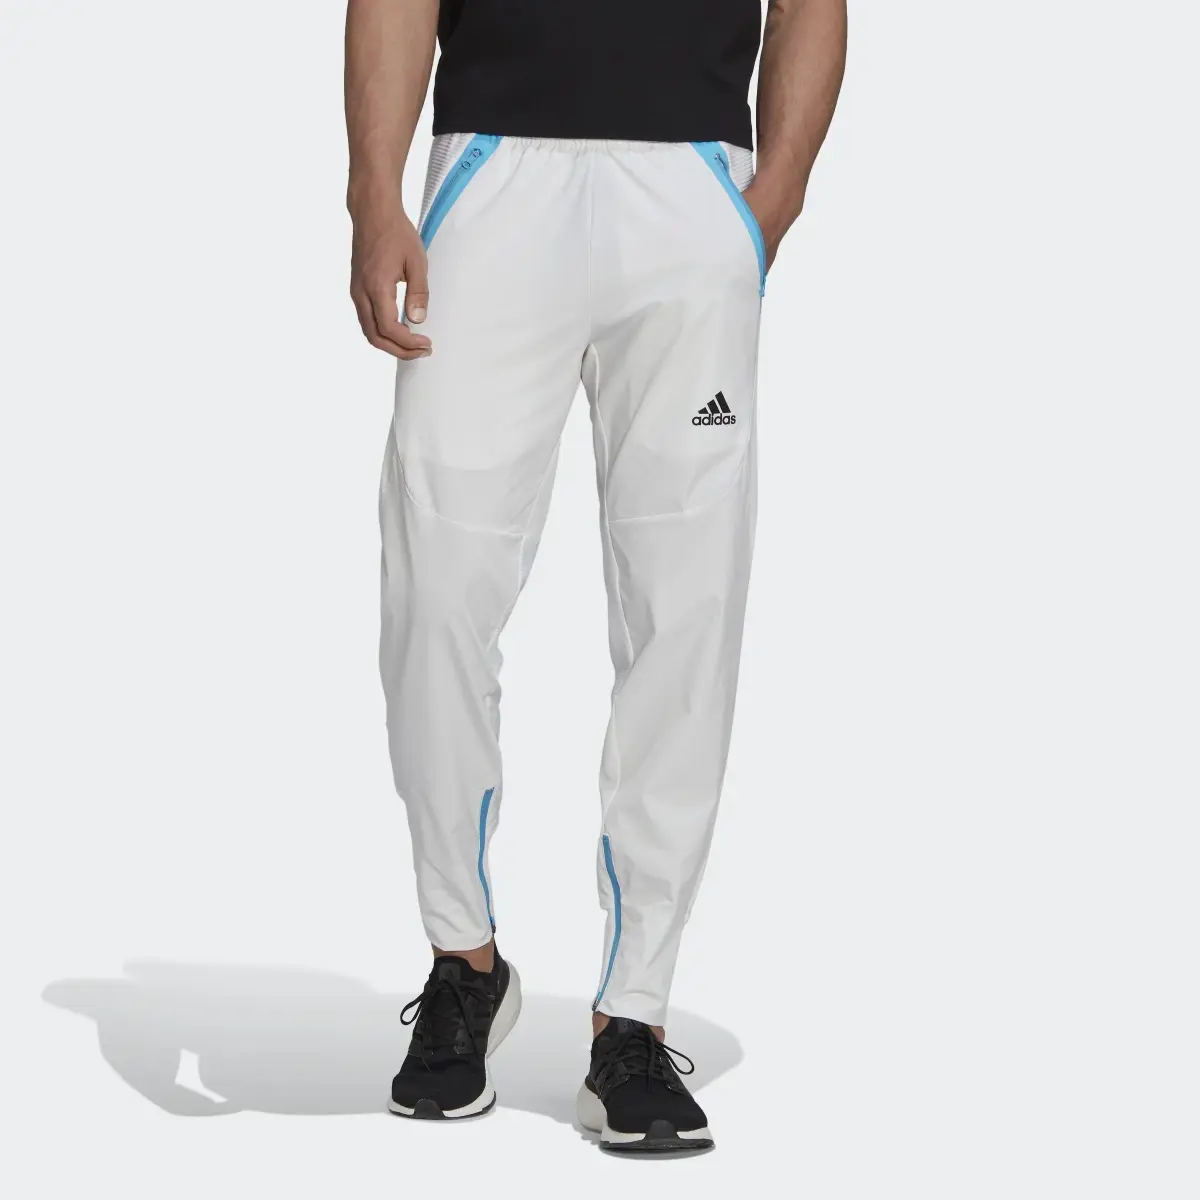 Adidas Designed for Gameday Pants. 1